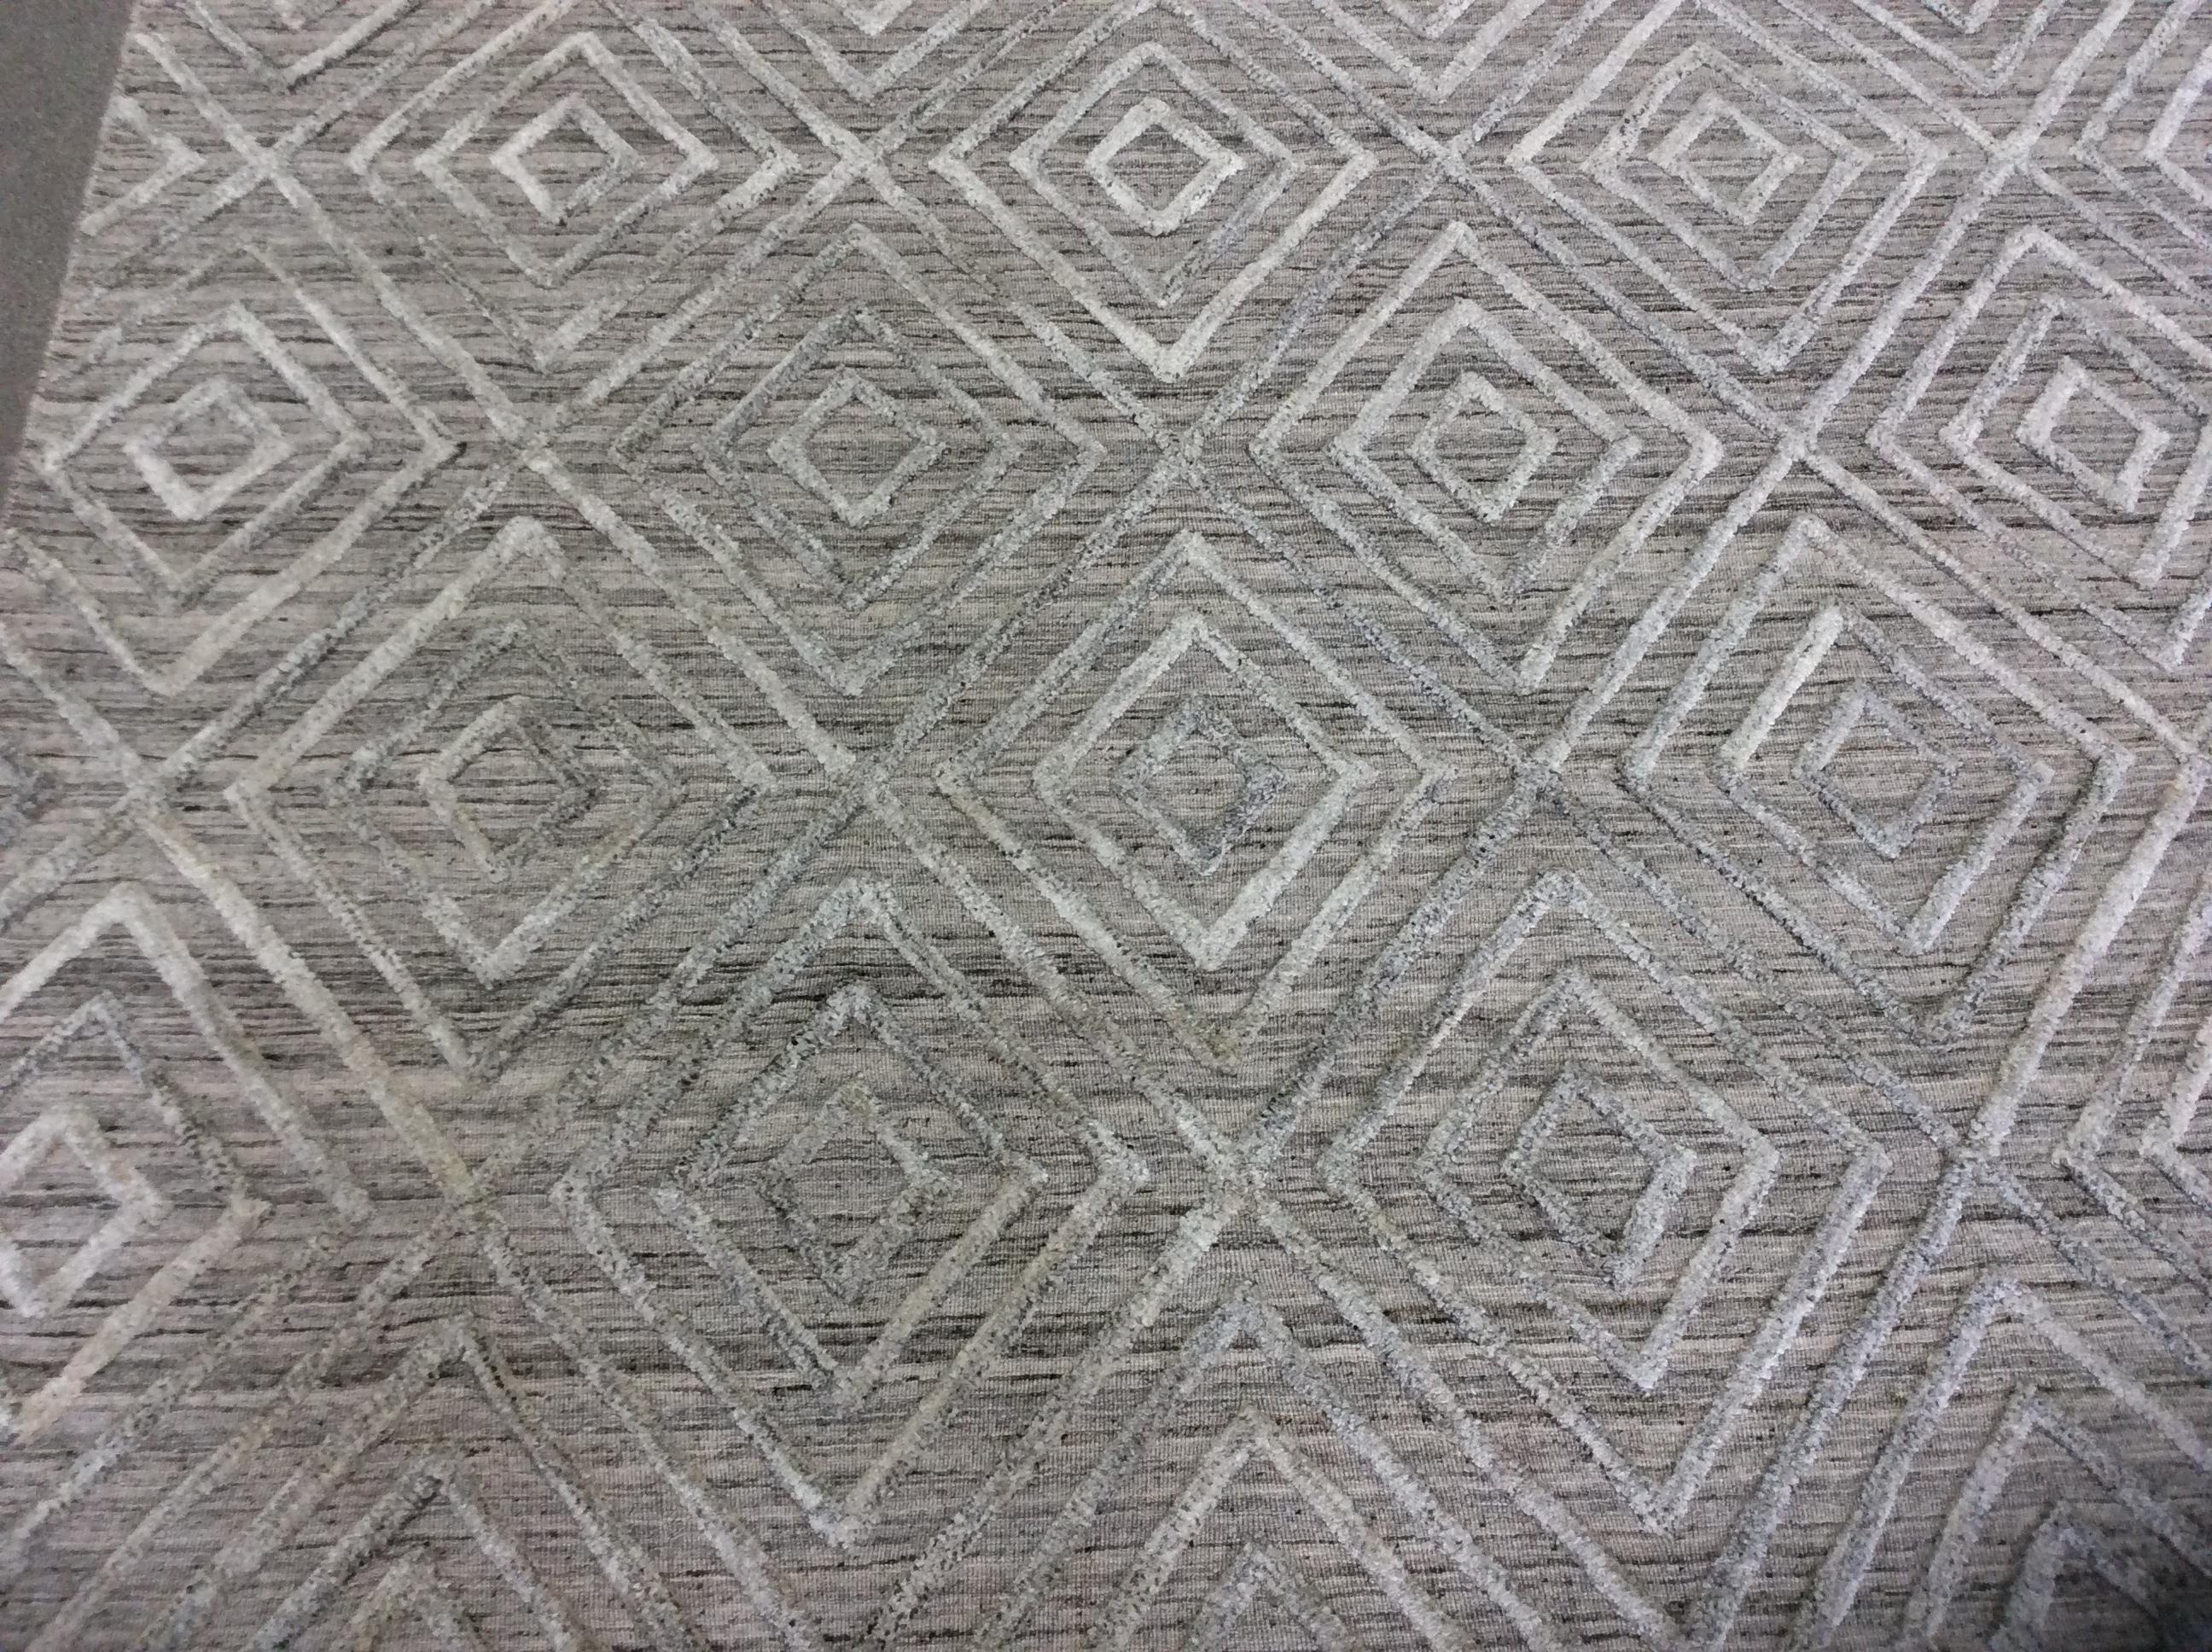 Geometric high low contemporary rug in blue linen.

High low design giving a casual yet polished look. With neutral color and raised geometry pattern.